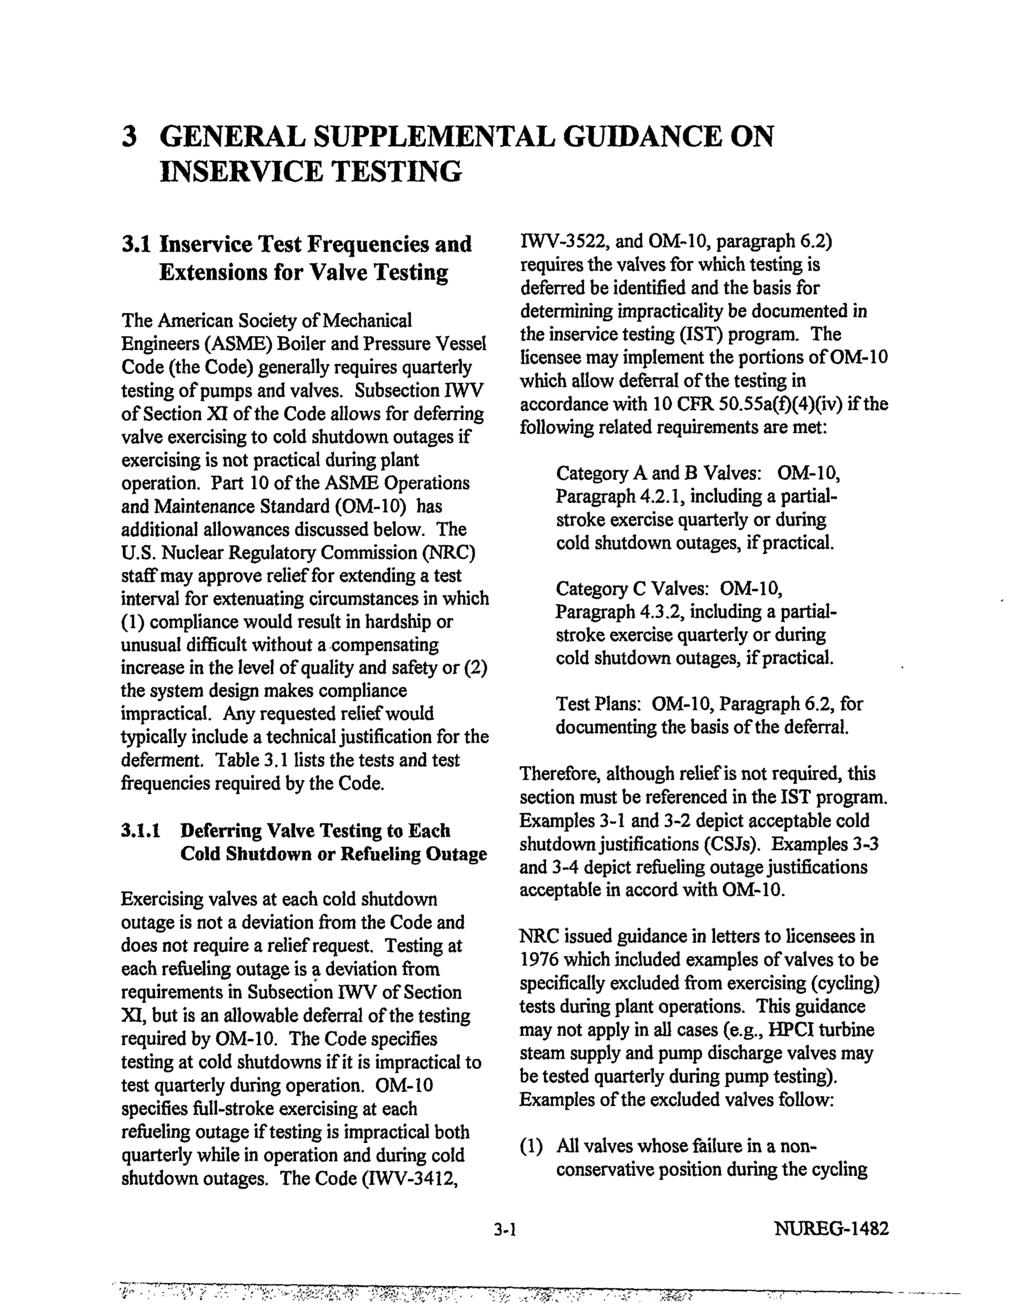 3 GENERAL SUPPLEMENTAL GUIDANCE ON INSERVICE TESTING 3.